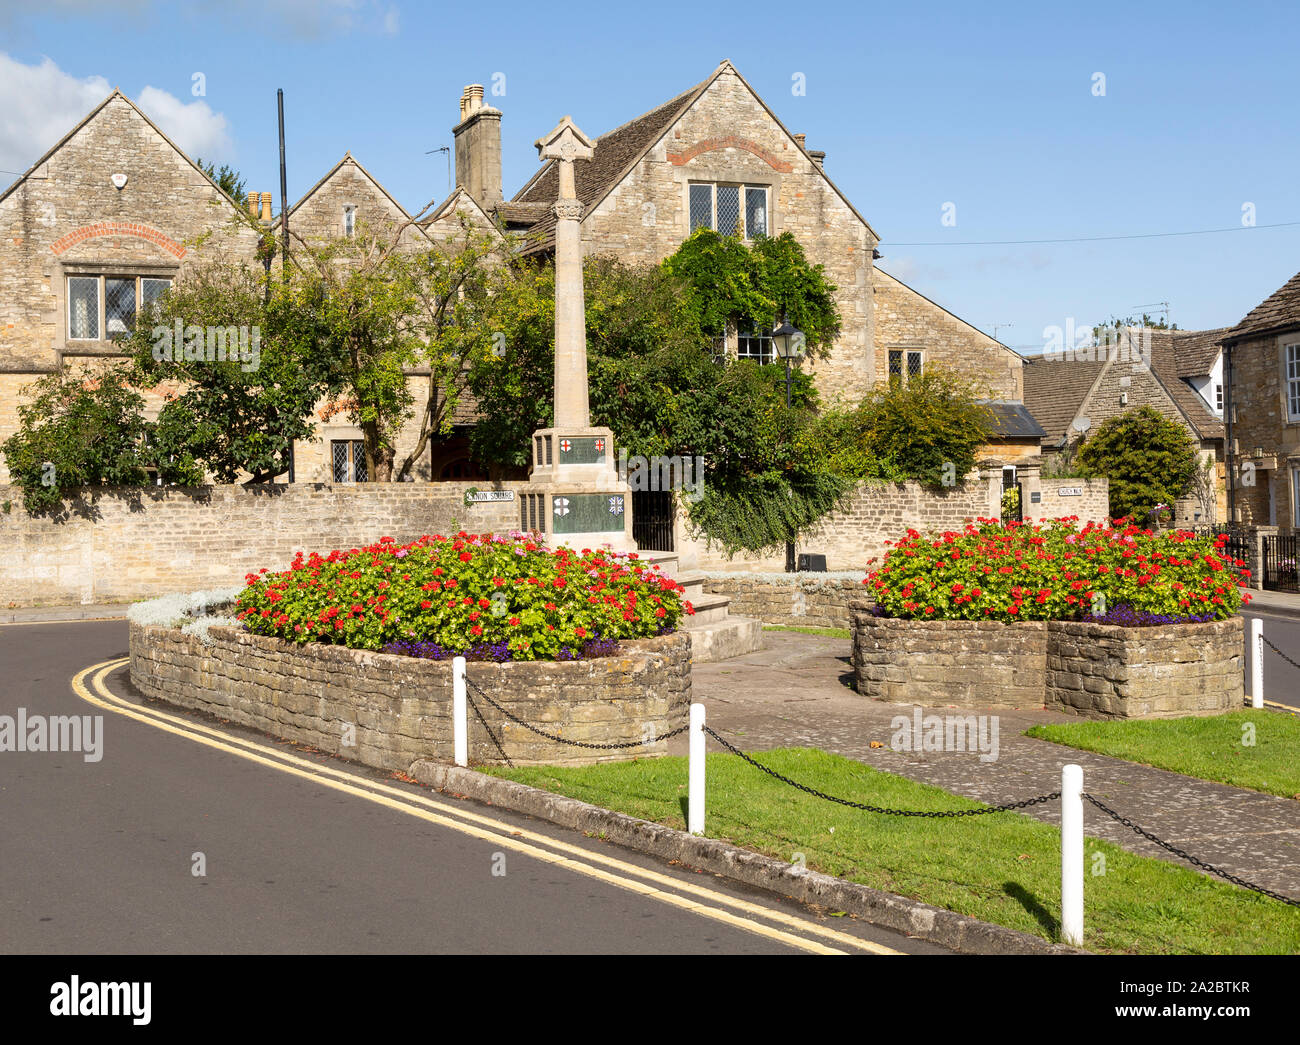 Historic Cotswold stone buildings and war memorial in Canon Square, Melksham, Wiltshire, England, UK Stock Photo